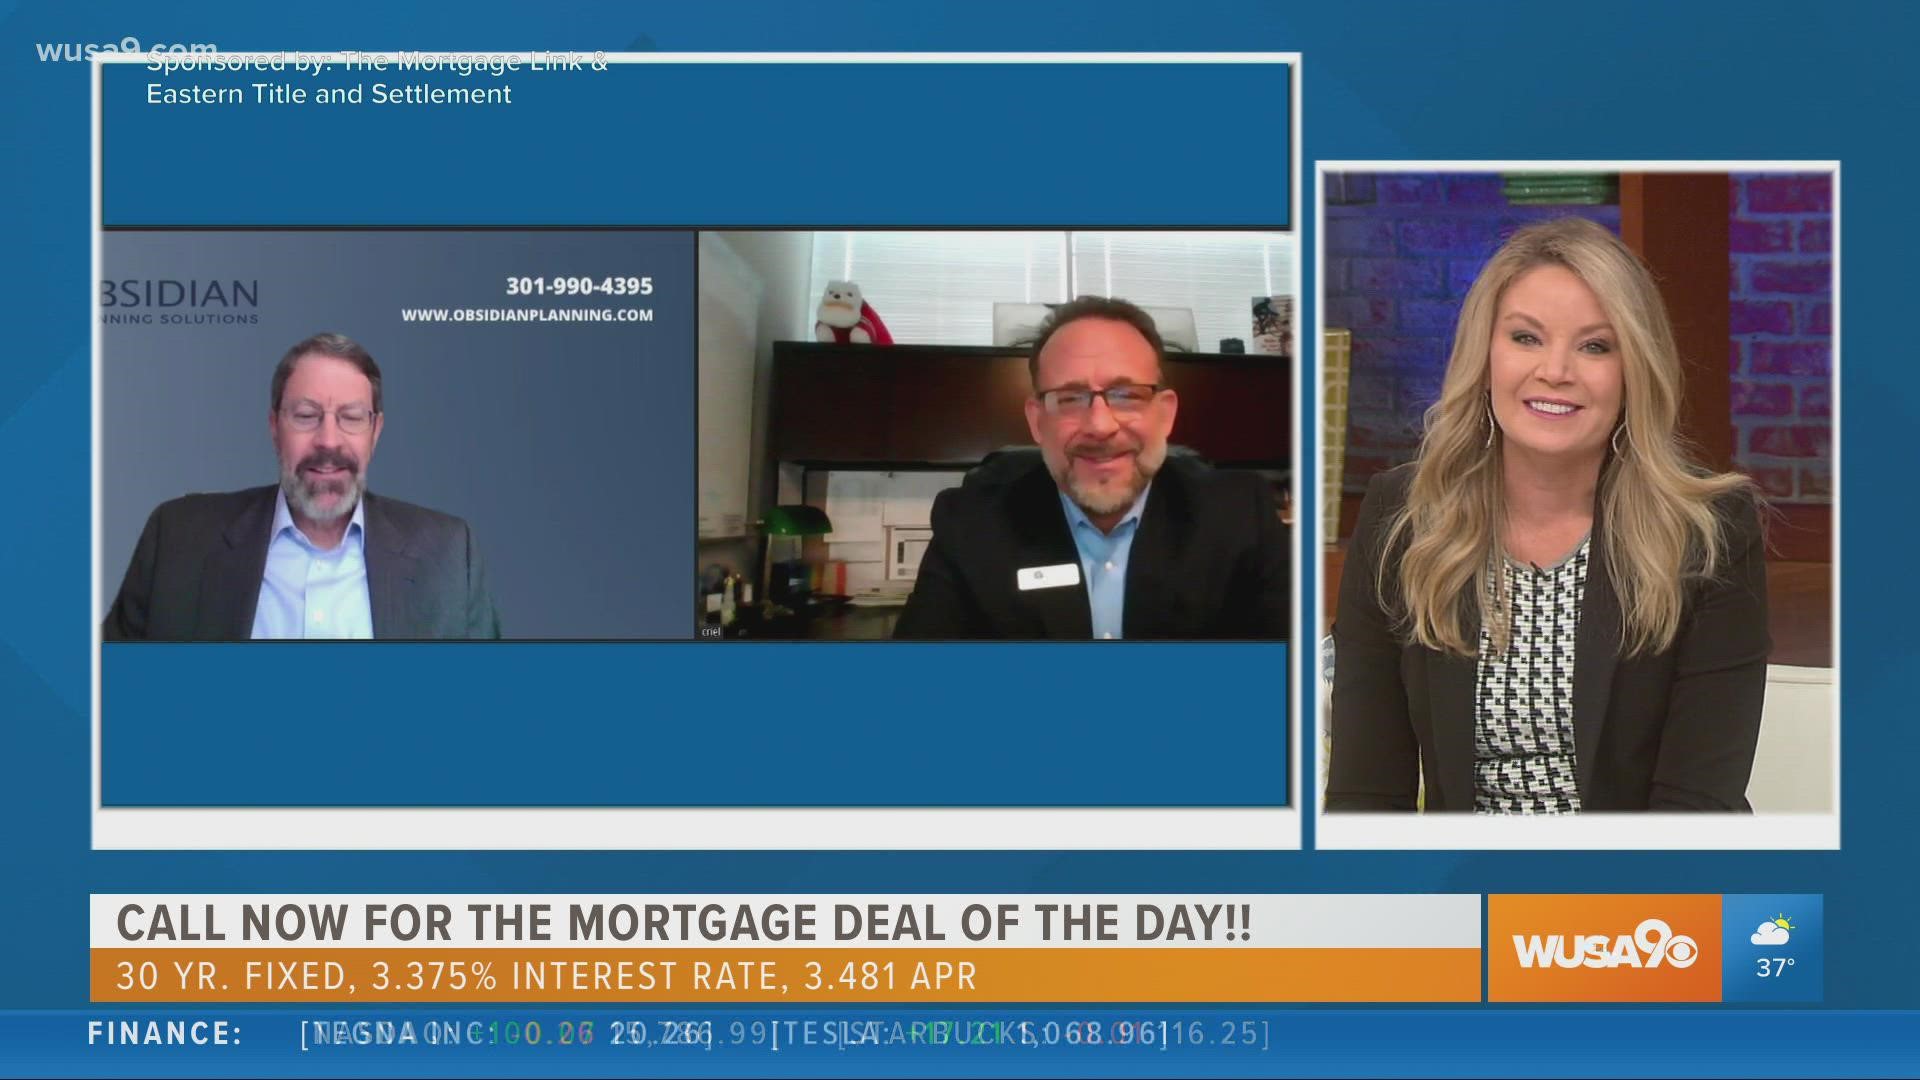 Carey Riel & Patrick Carroll of Obsidian Planning explain the best ways to purchase investment properties. Sponsor: The Mortgage Link and Eastern Title & Settlement.